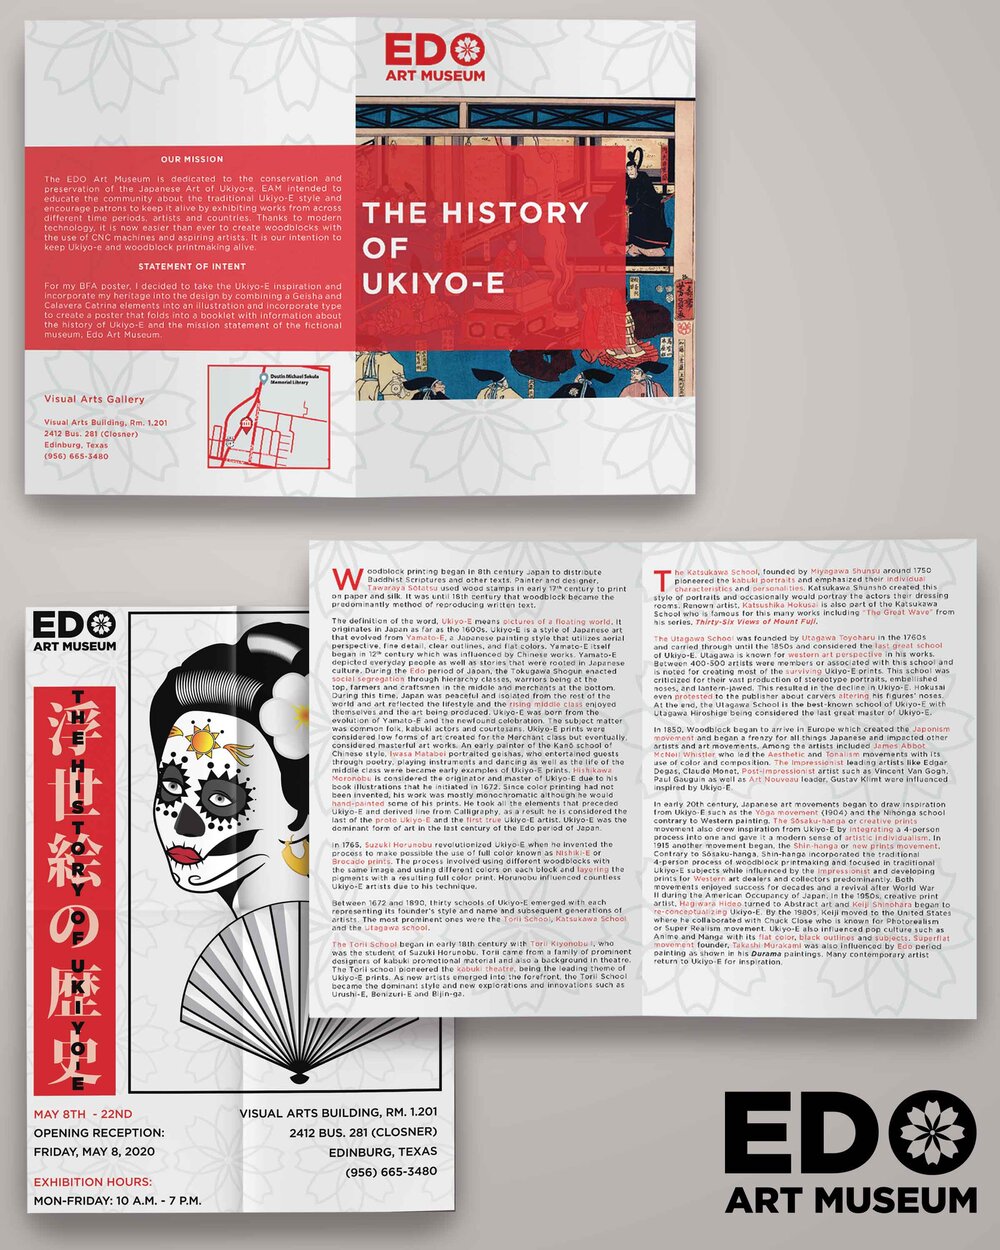 EAM Paper Zine / 11.7” x 16.5” / A foldable poster brochure for The History of Ukiyo-E exhibition.